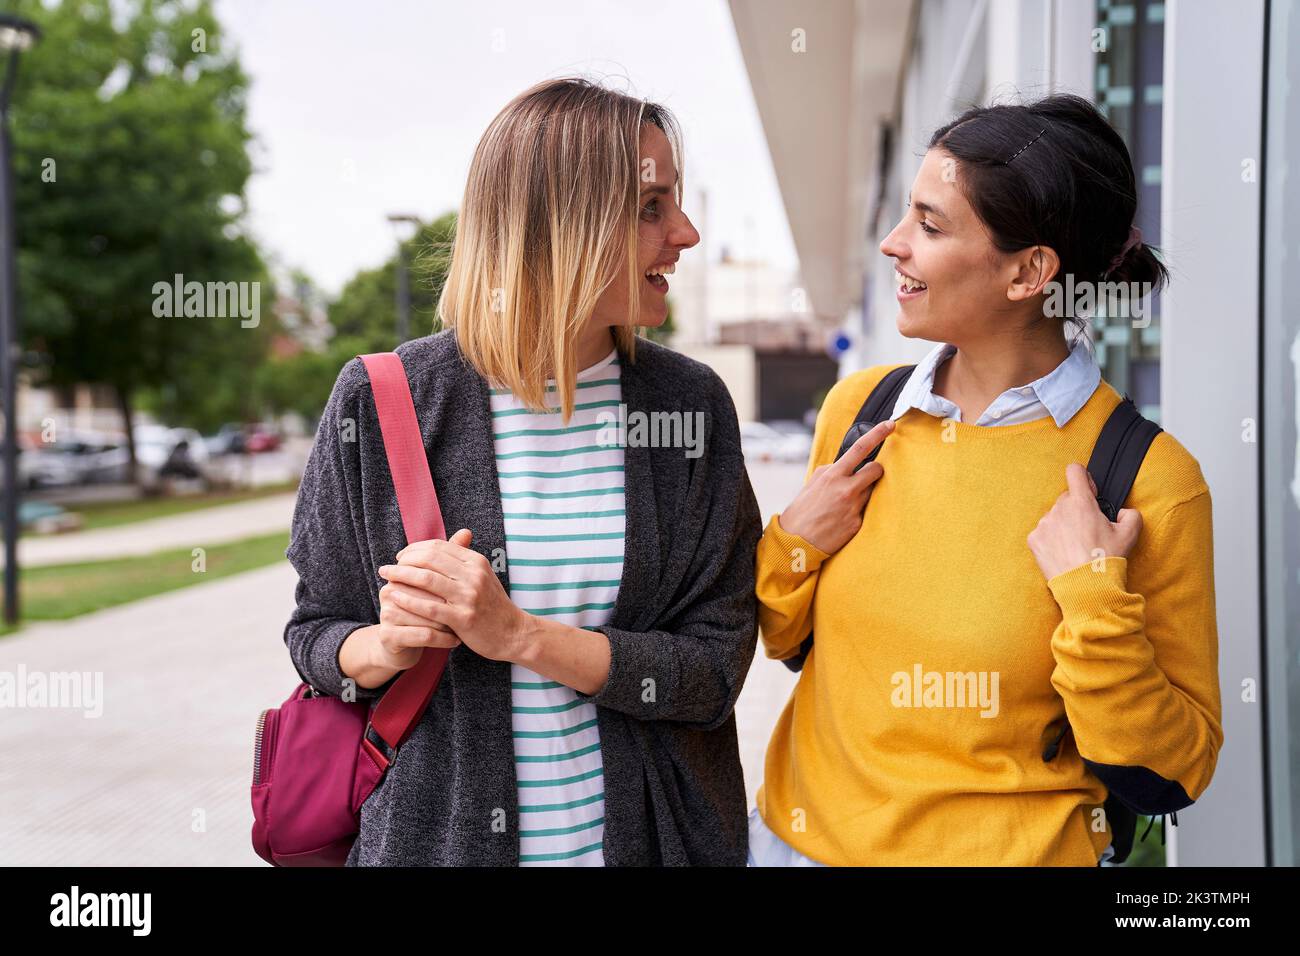 Medium shot of two female friends looking at each other while taking a walk outdoors Stock Photo